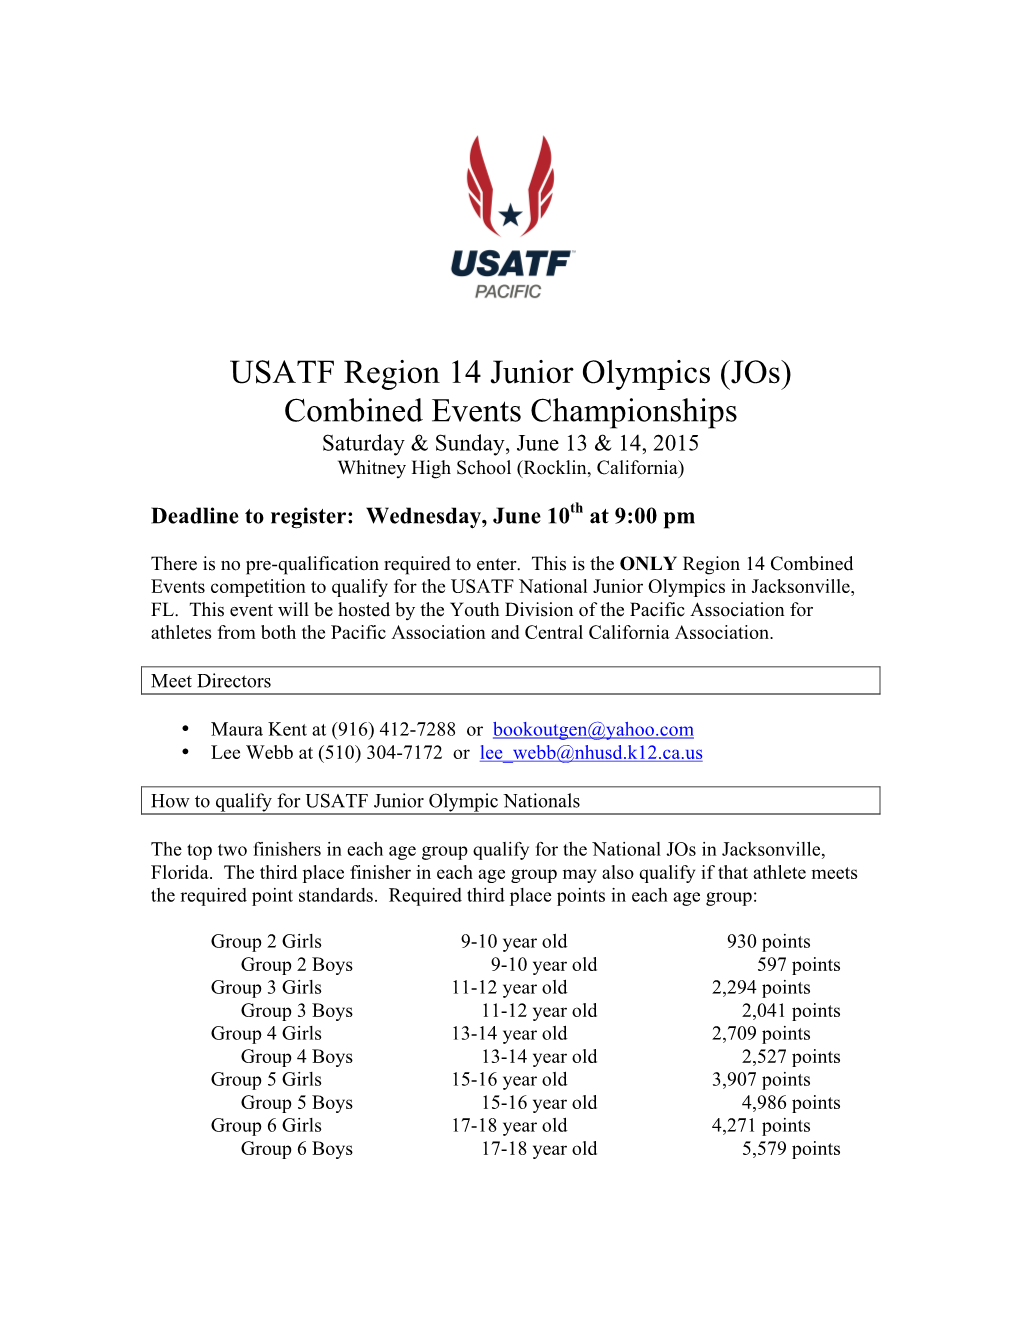 Combined Events Championships Saturday & Sunday, June 13 & 14, 2015 Whitney High School (Rocklin, California)